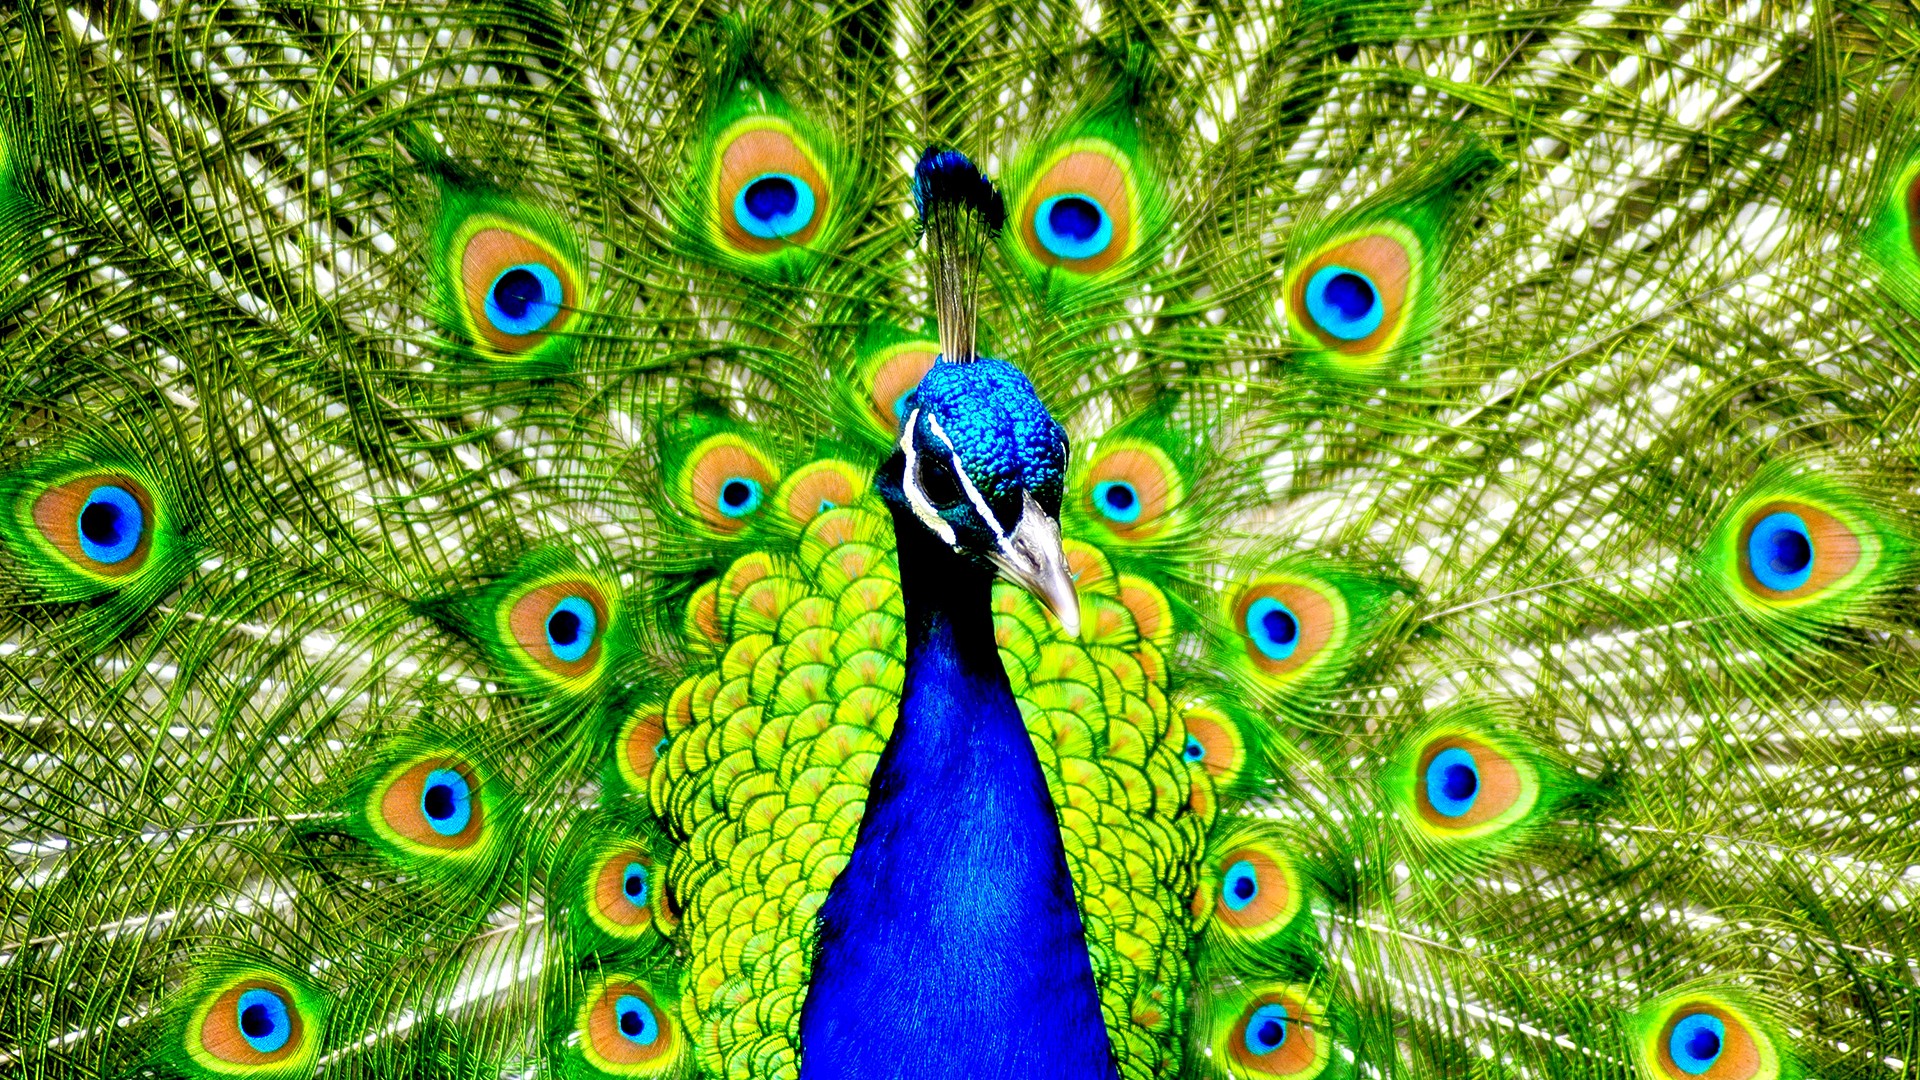 Peacock Wallpaper Live HD Hq Pictures Image Photos